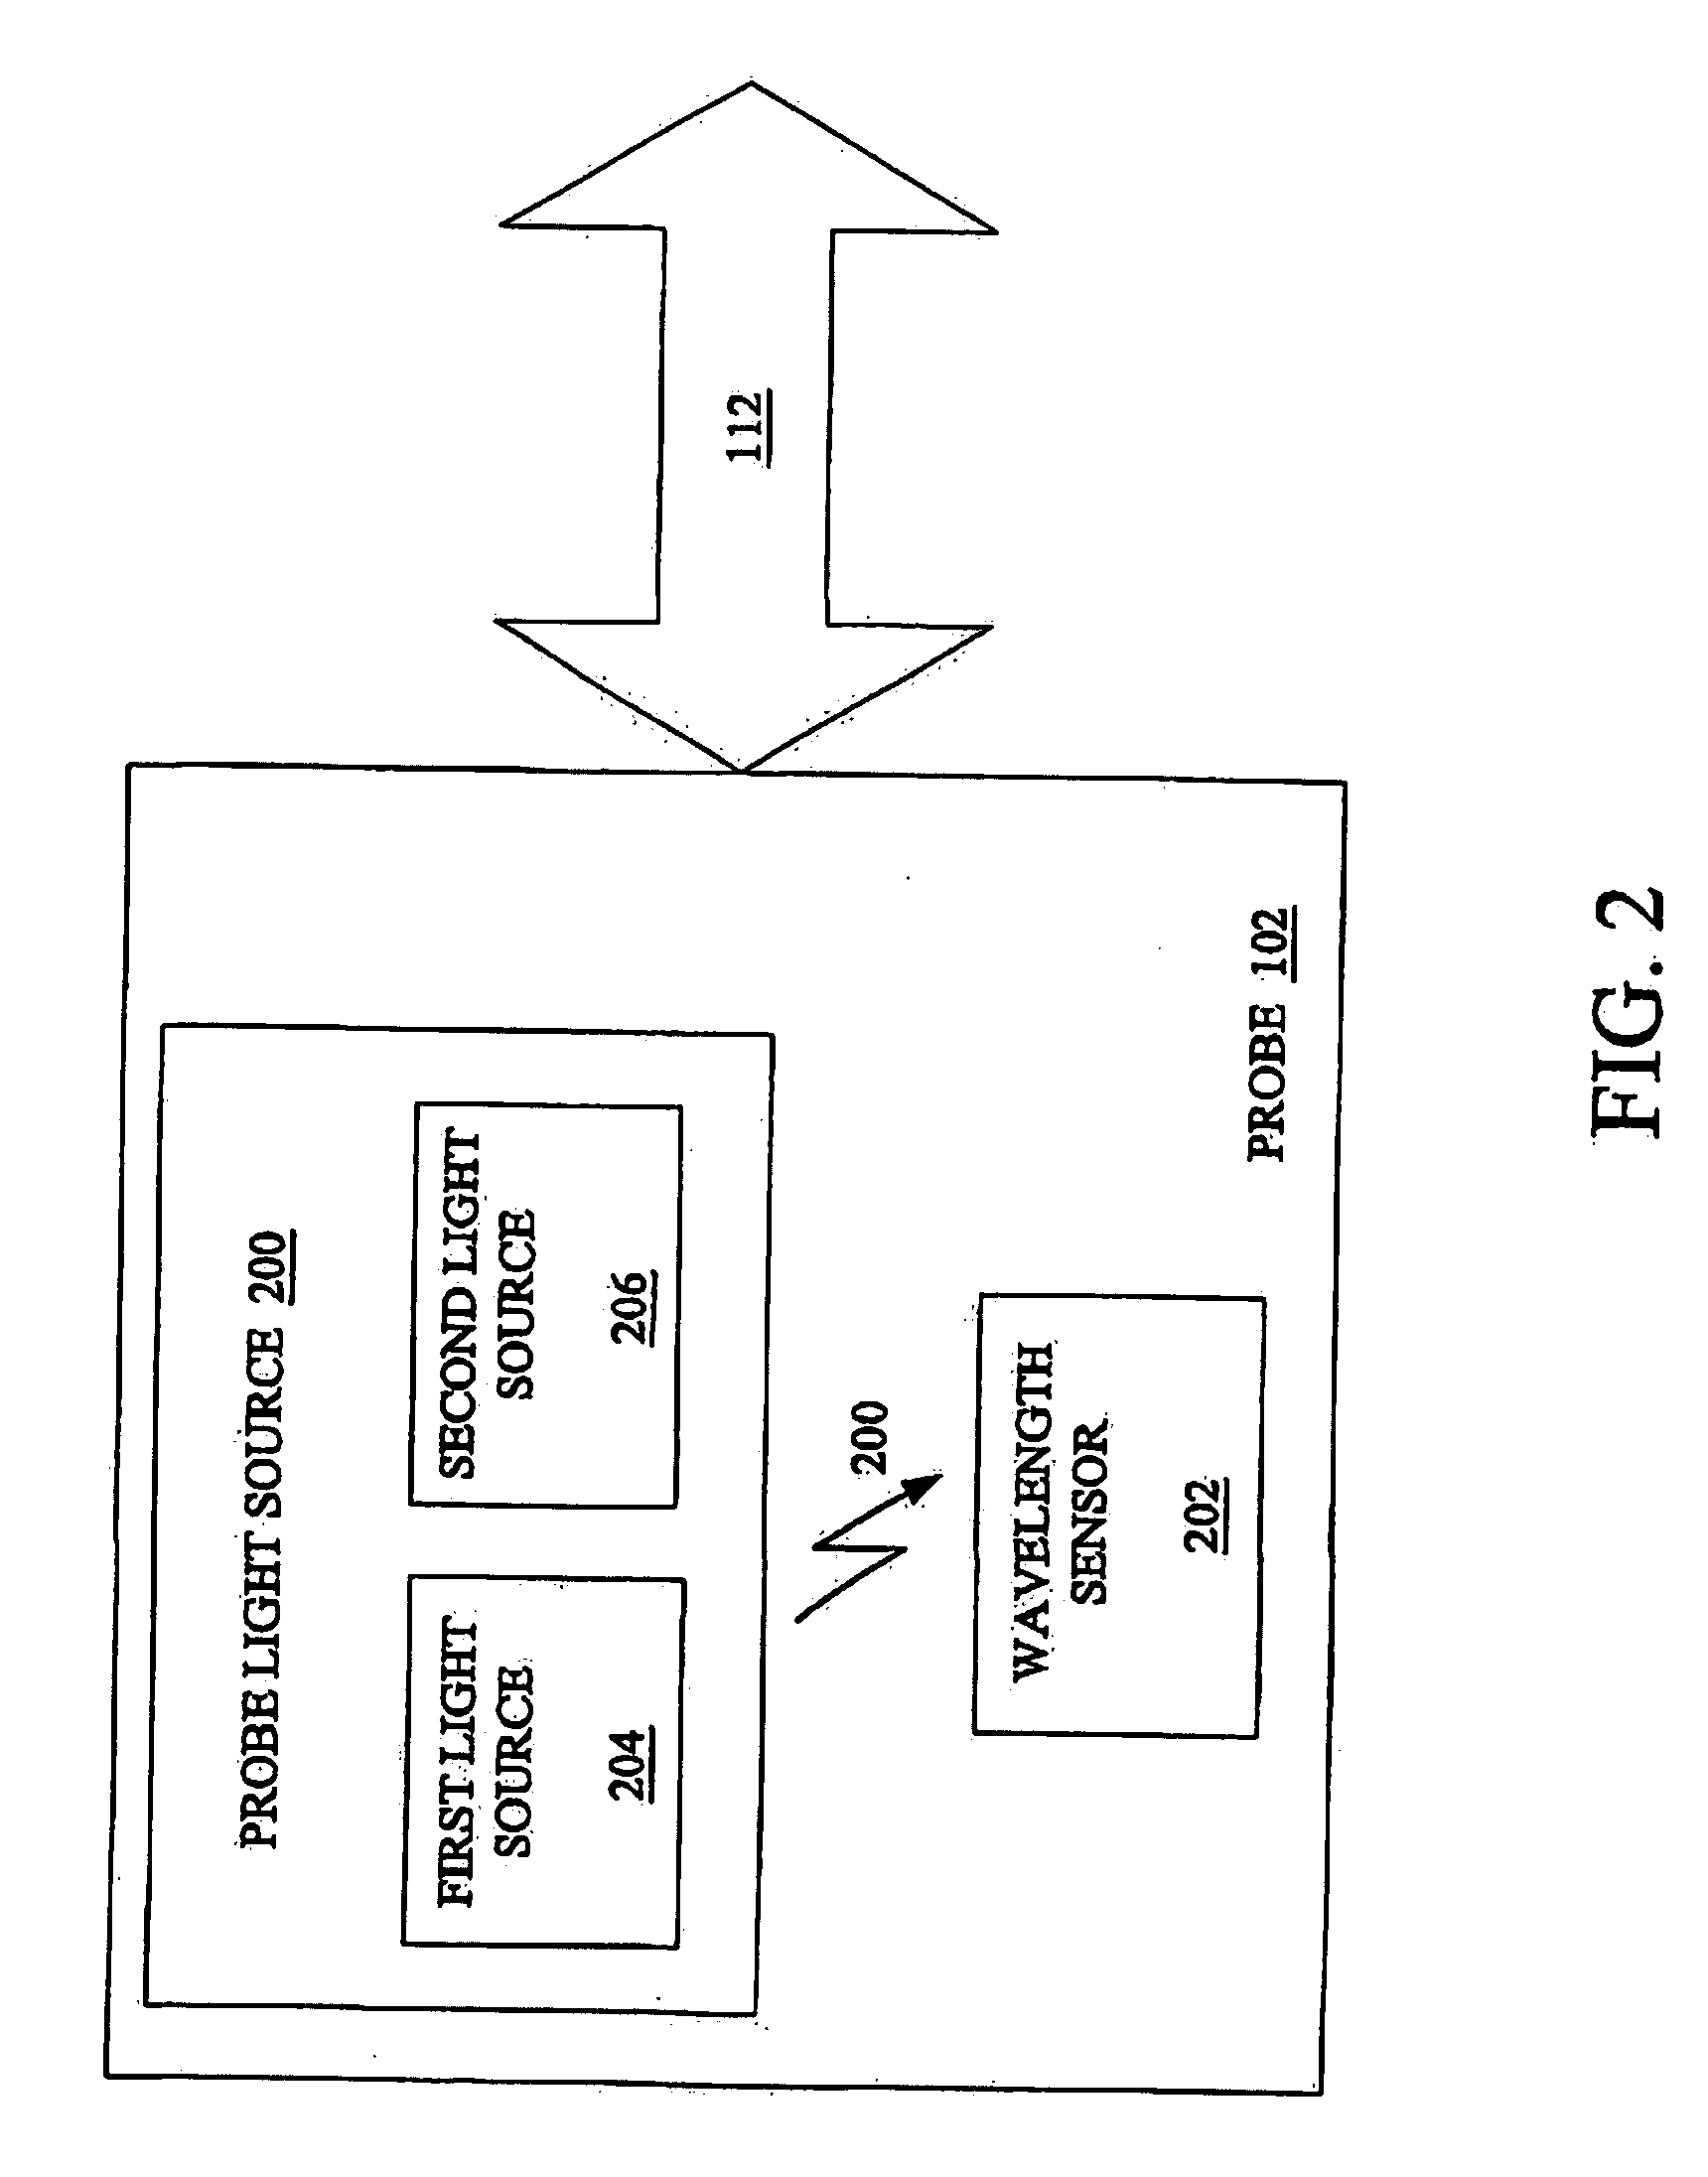 System and method for a non-invasive medical sensor